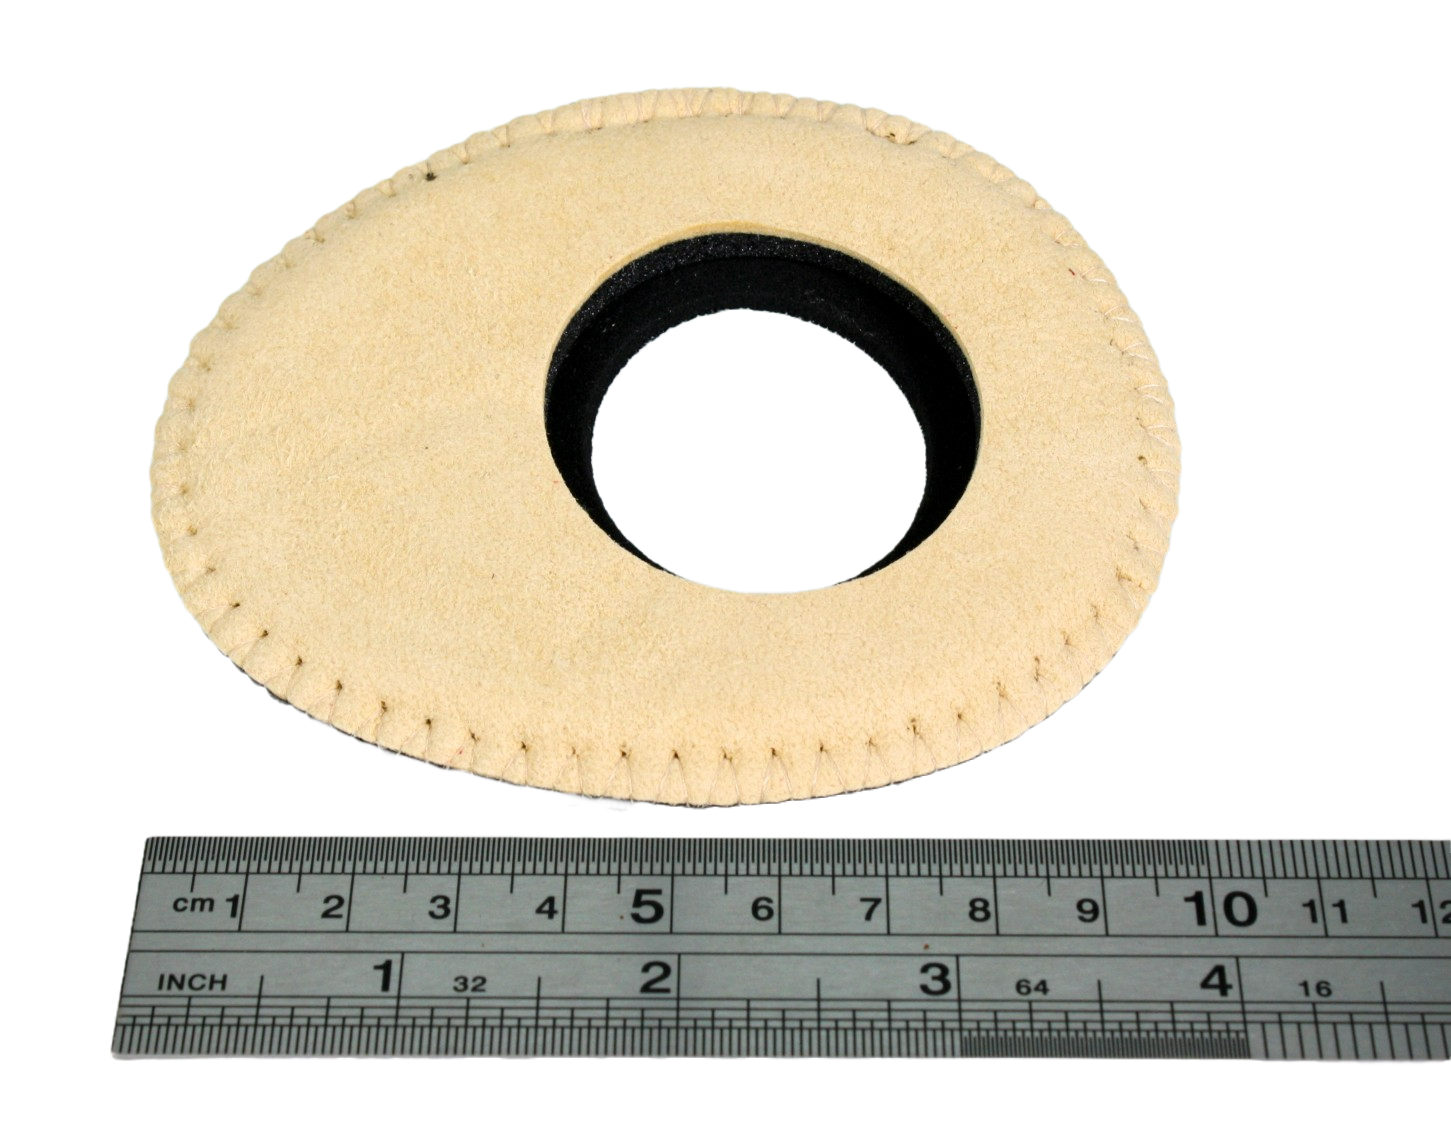 Oval Large Eye Chamois next to a ruler showing that the longest part is just under 10cm